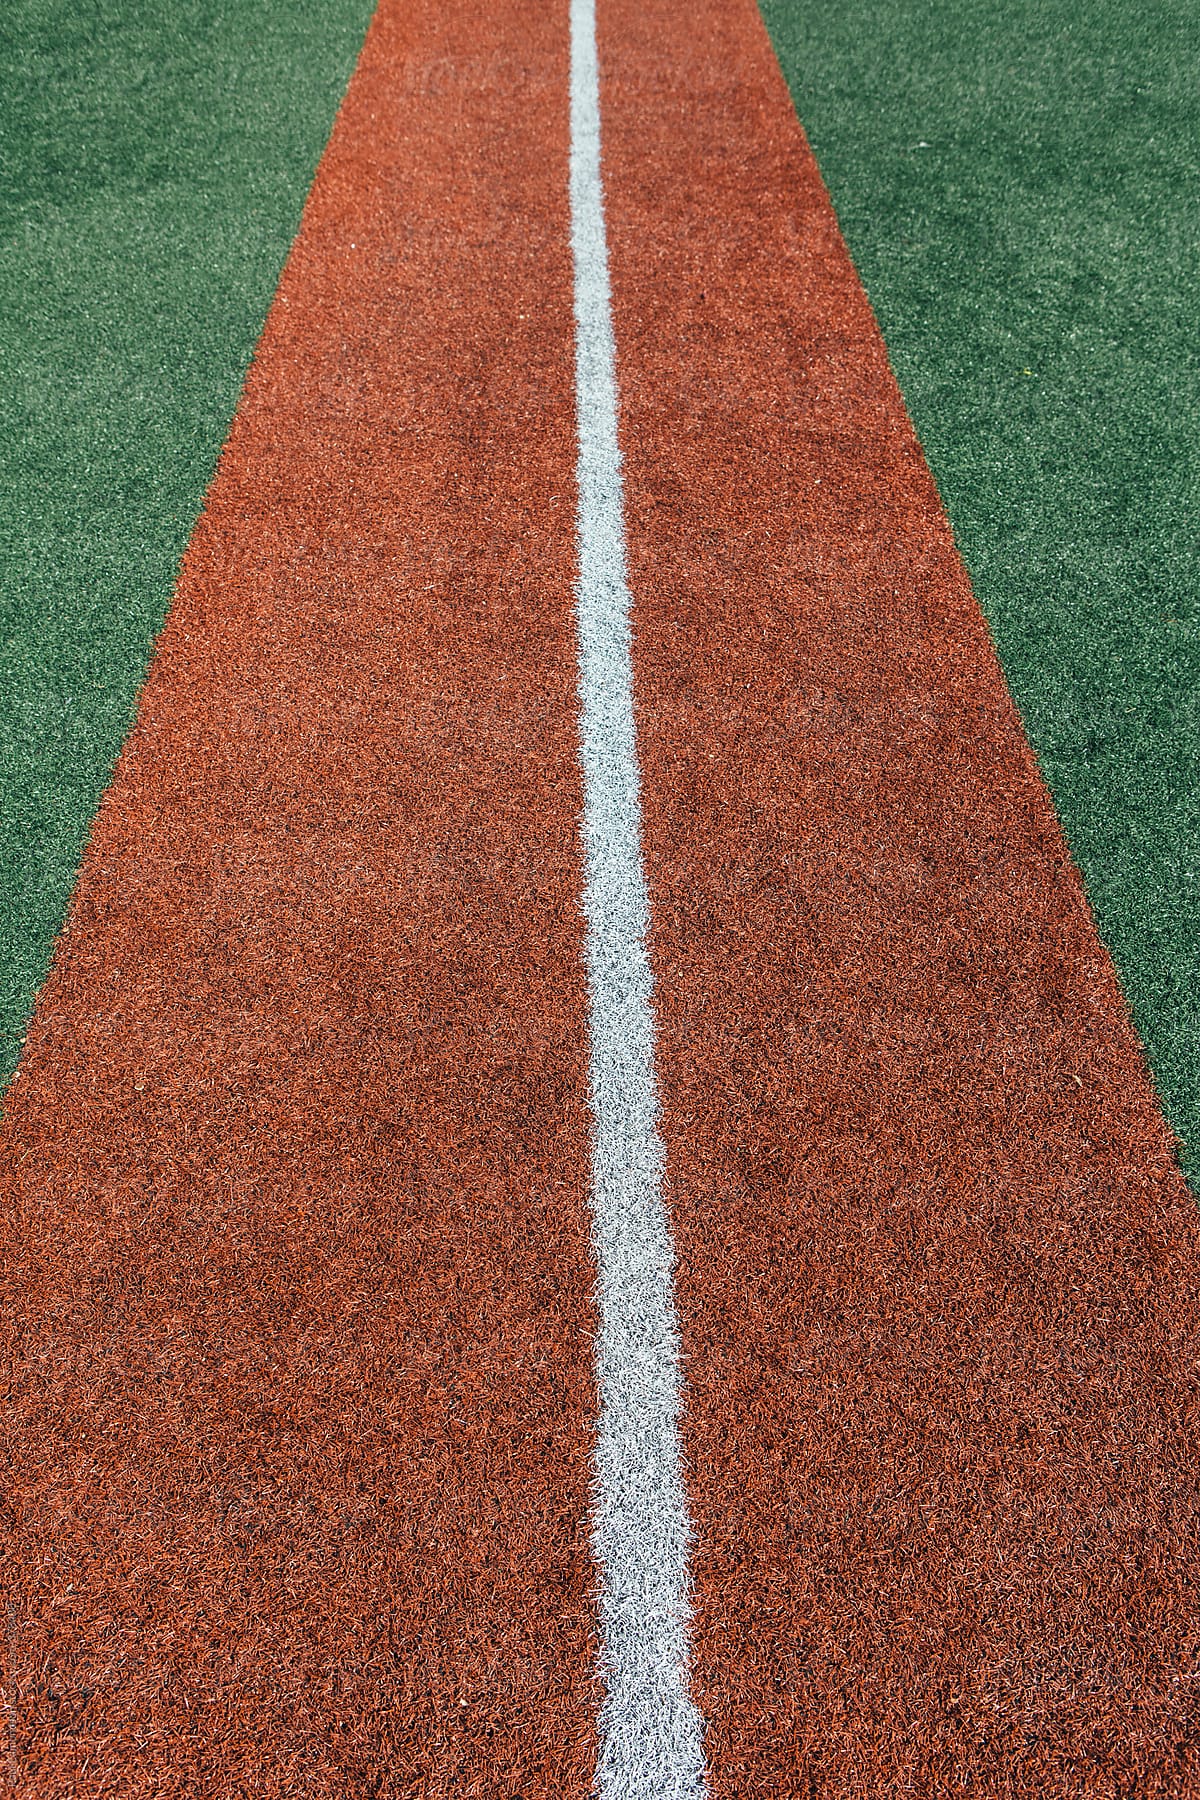 Boundary lines on artificial turf sports field